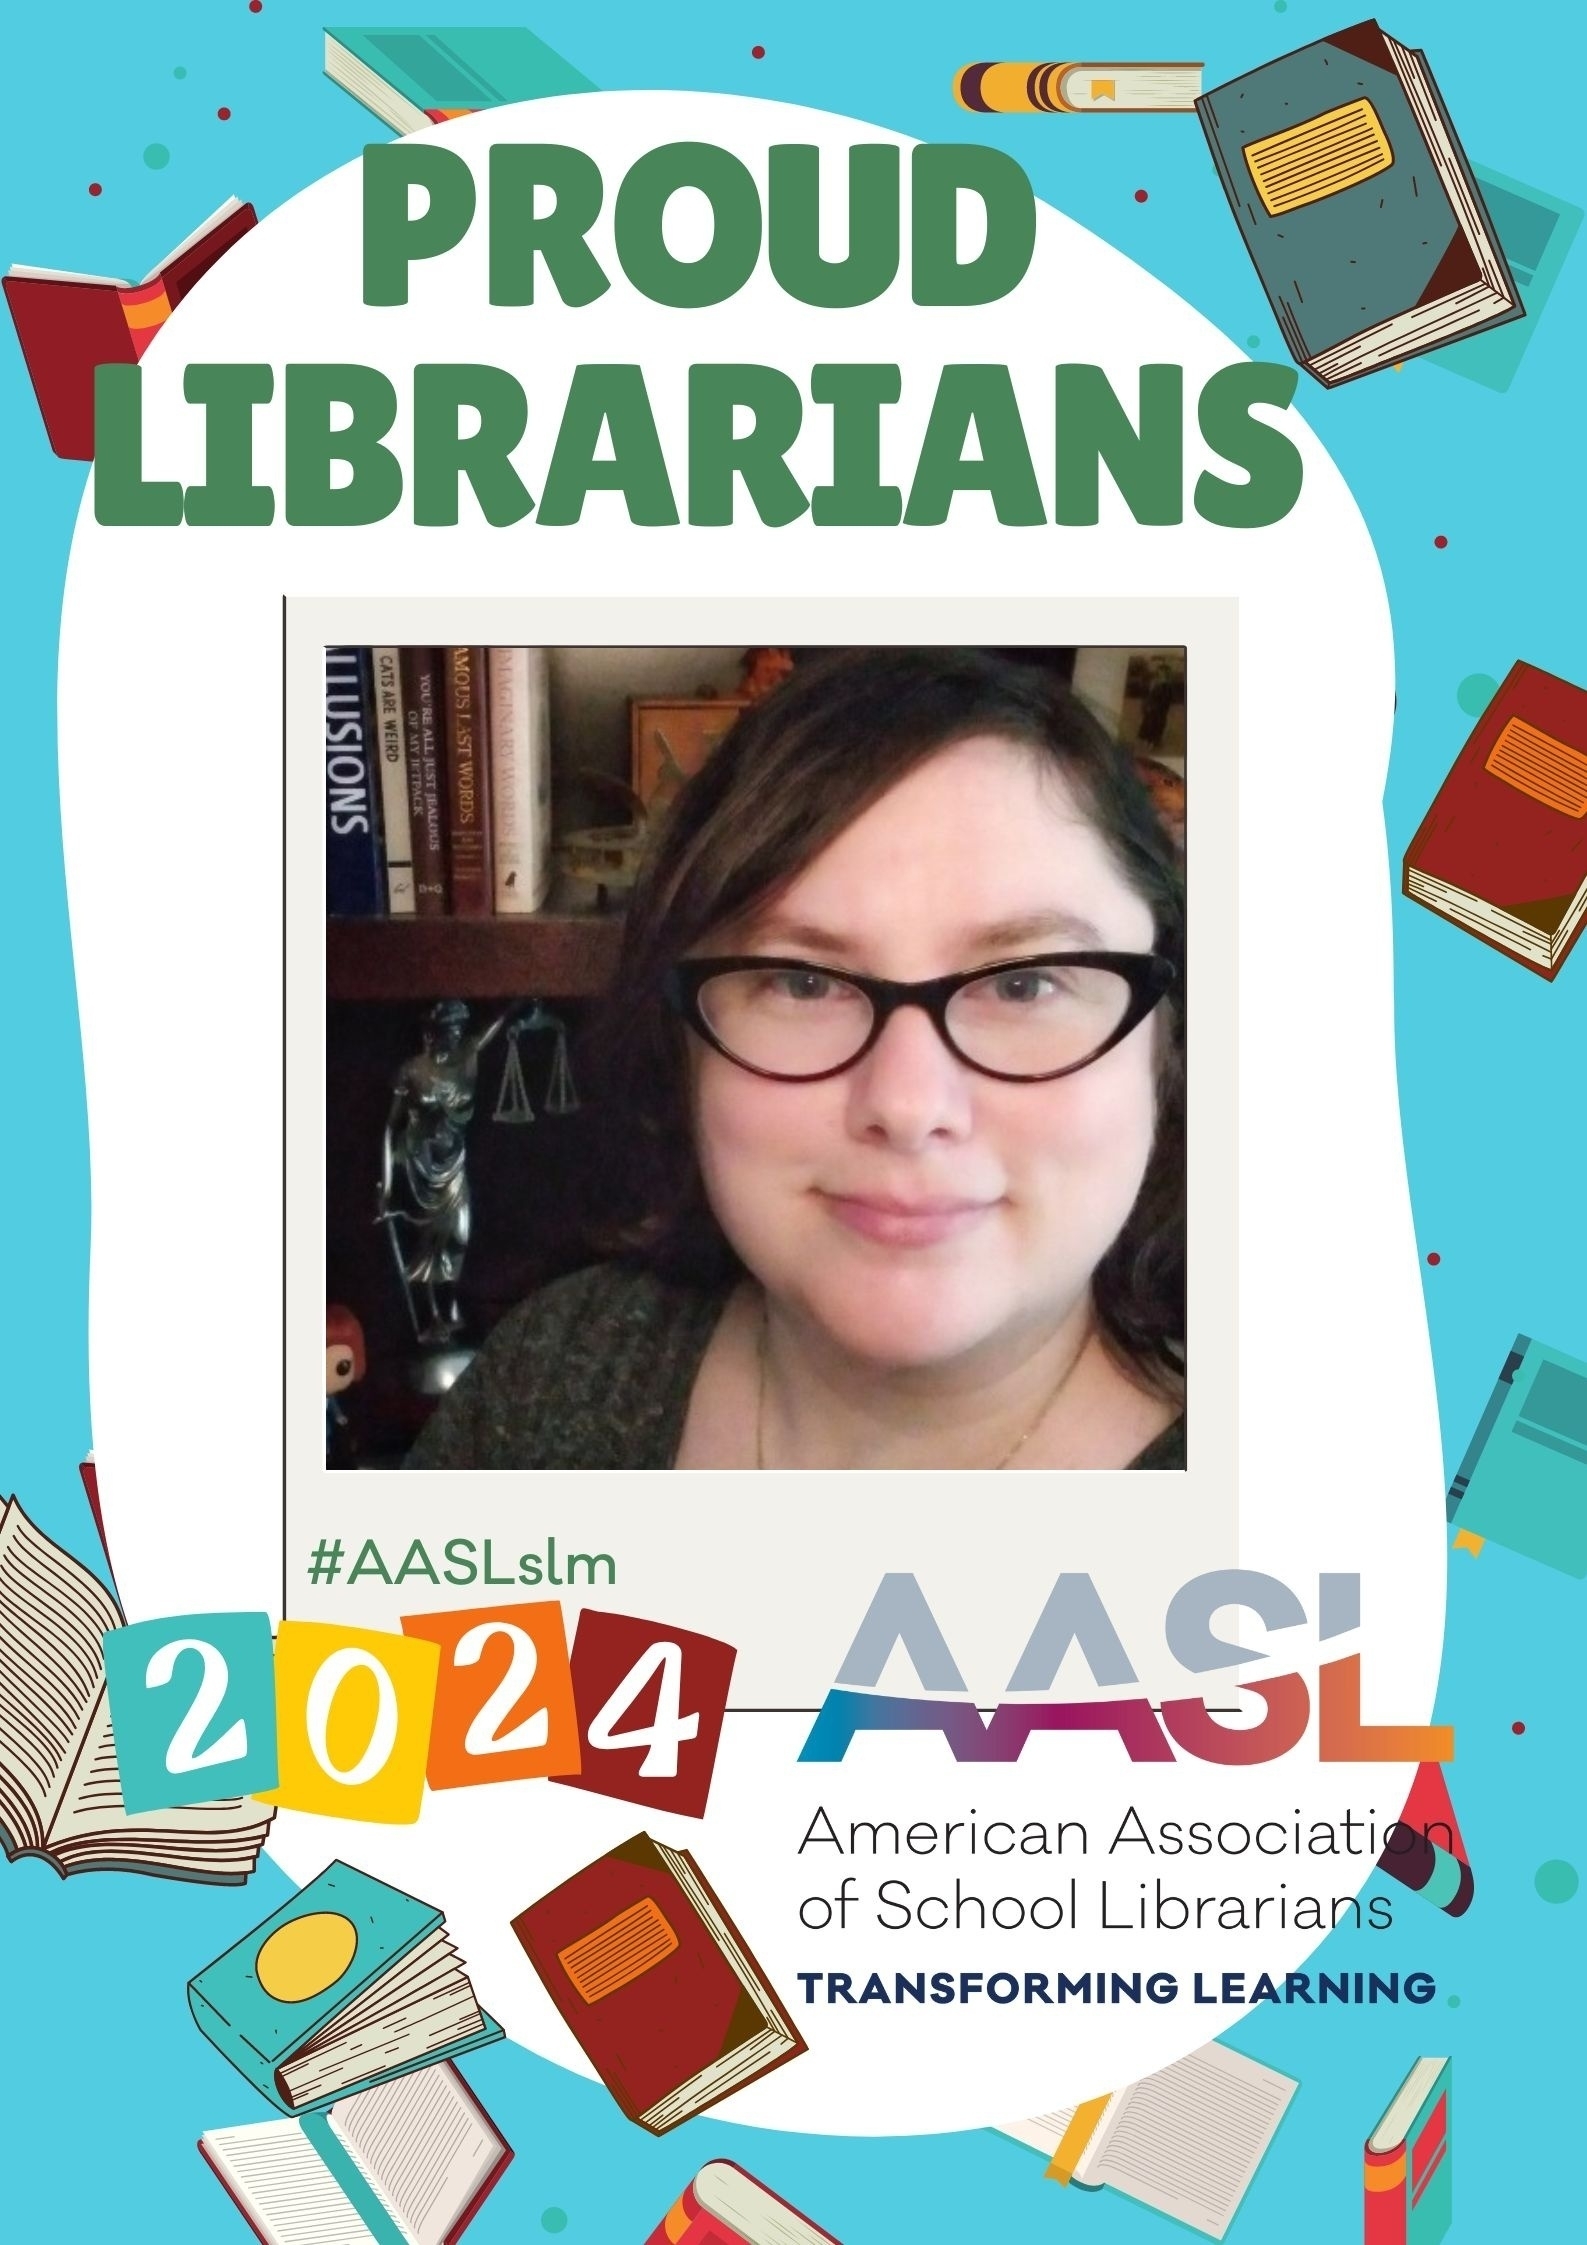 A flyer reads 'Proud Librarians 2024 American Association of School Librarians Transforming Learning' with a photograph of Kimberly Hirsh, a white woman with dark hair and glasses, and illustrations of books